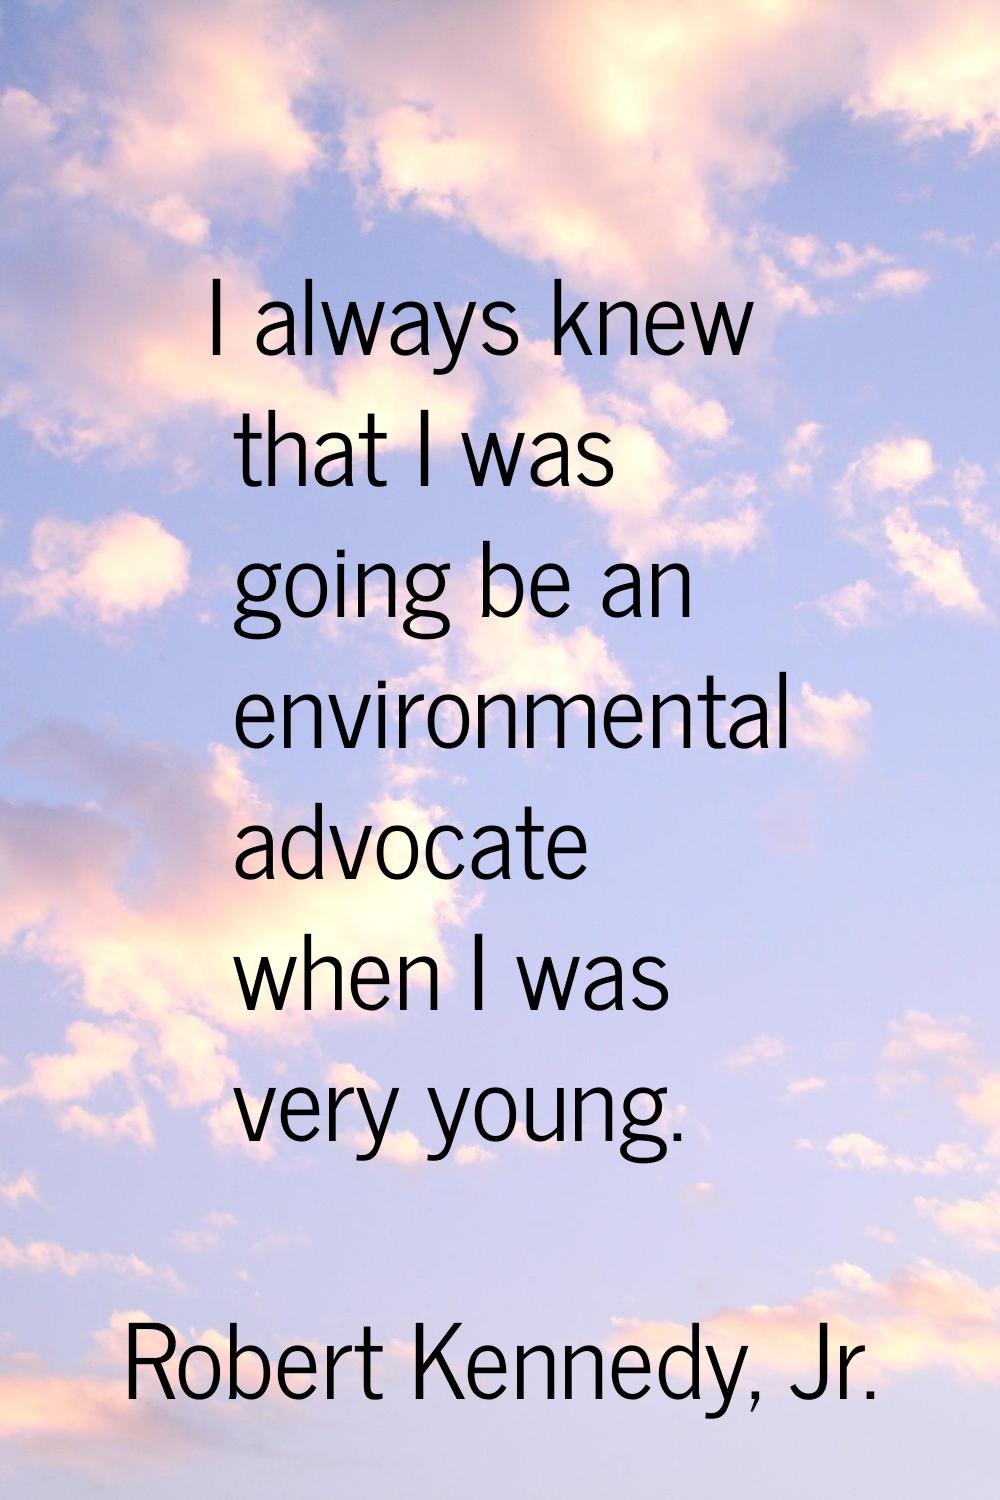 I always knew that I was going be an environmental advocate when I was very young.